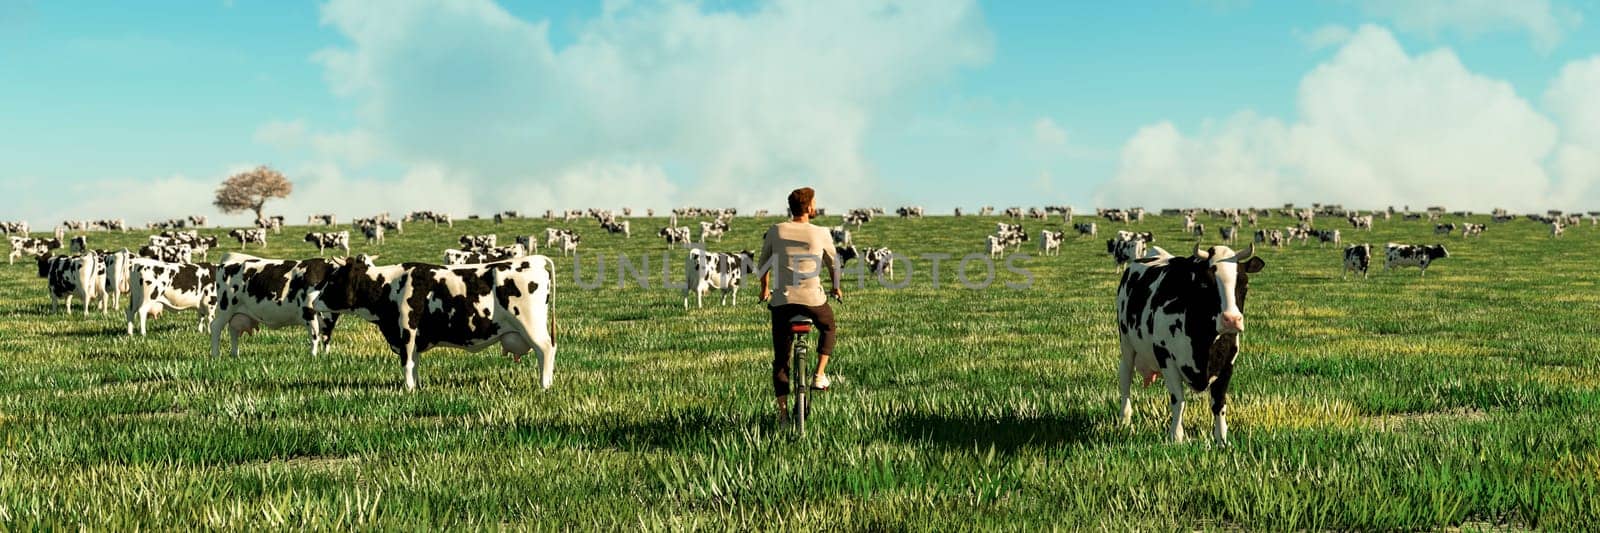 Countryside Cycling: Man Biking Through a Herd of Cows on a Pastoral Farm by Juanjo39